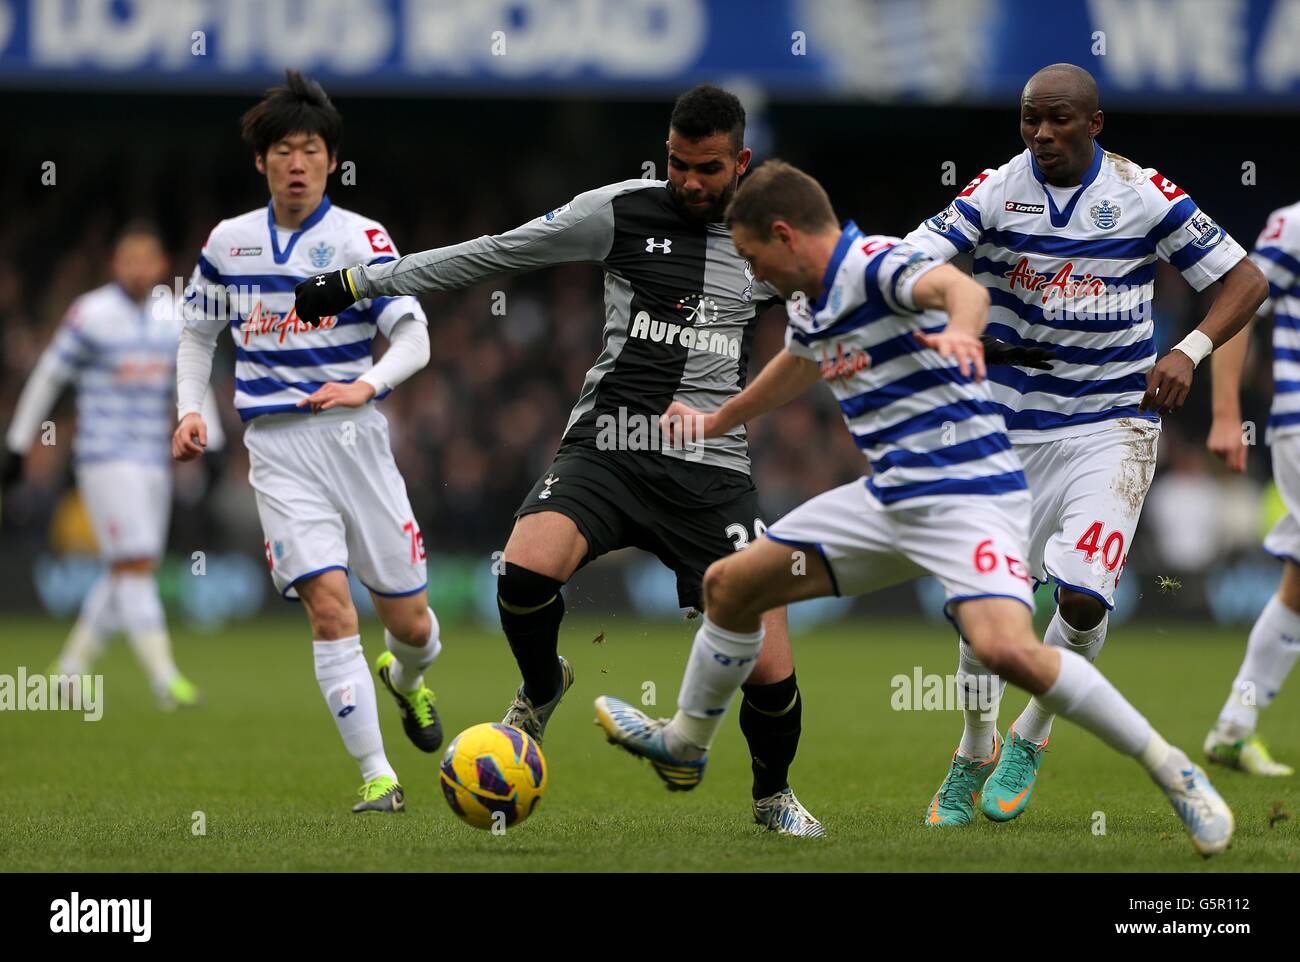 Tottenham Hotspur's Raniere Sandro (centre) is surrounded by Queens Park Rangers' Clint Hill (6), Stephane Mbia (right) and Ji-Sung Park (left) Stock Photo